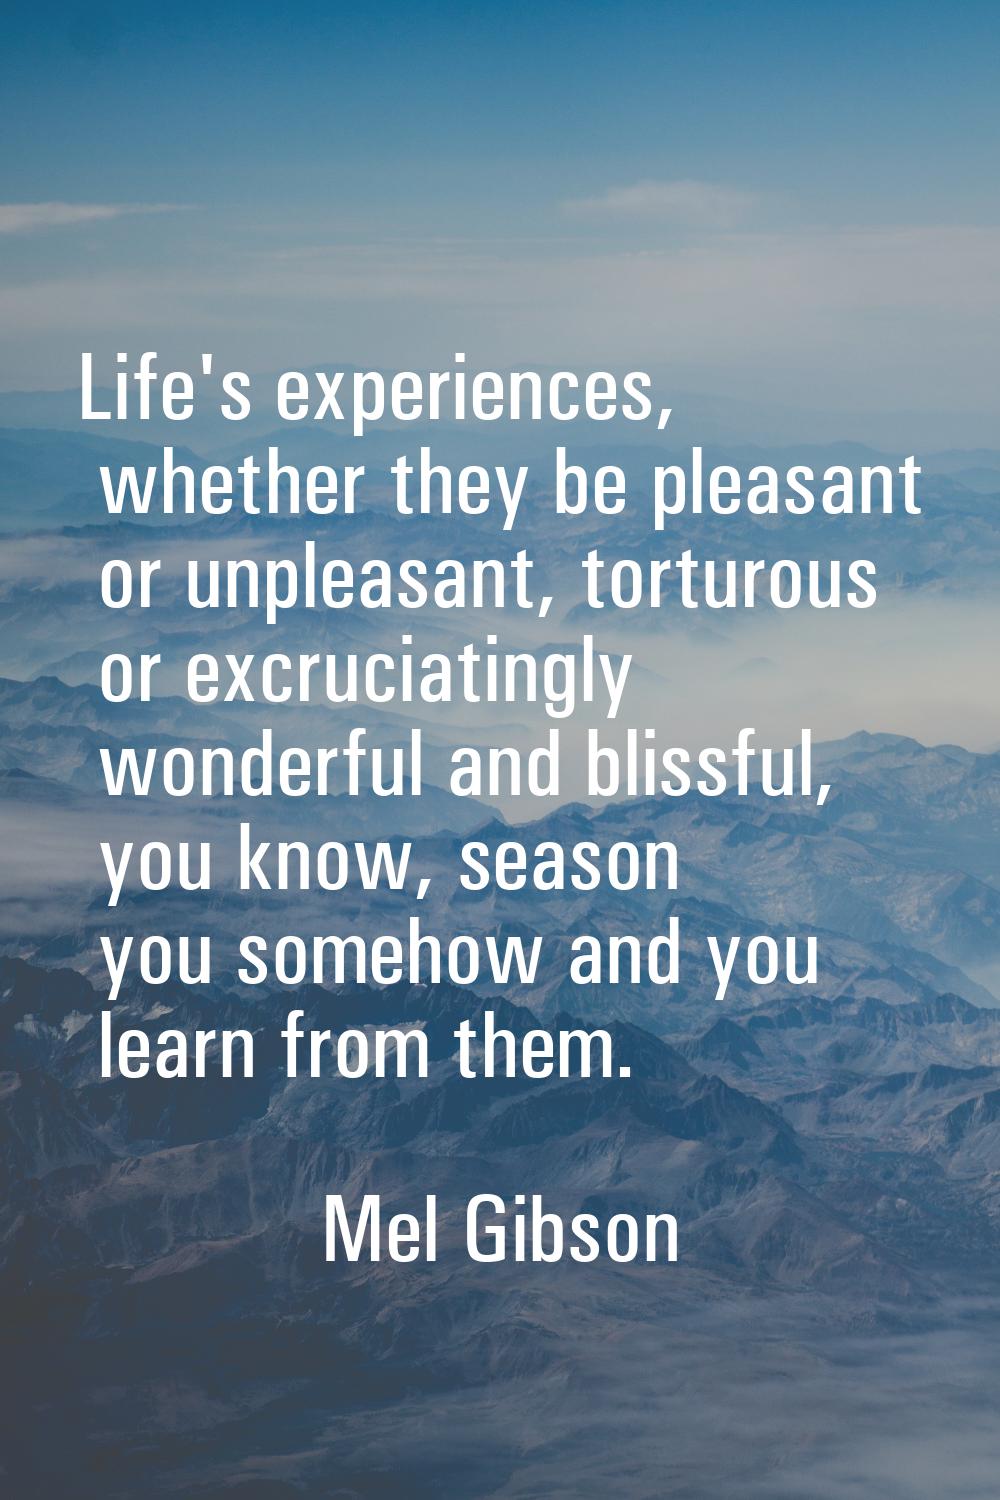 Life's experiences, whether they be pleasant or unpleasant, torturous or excruciatingly wonderful a